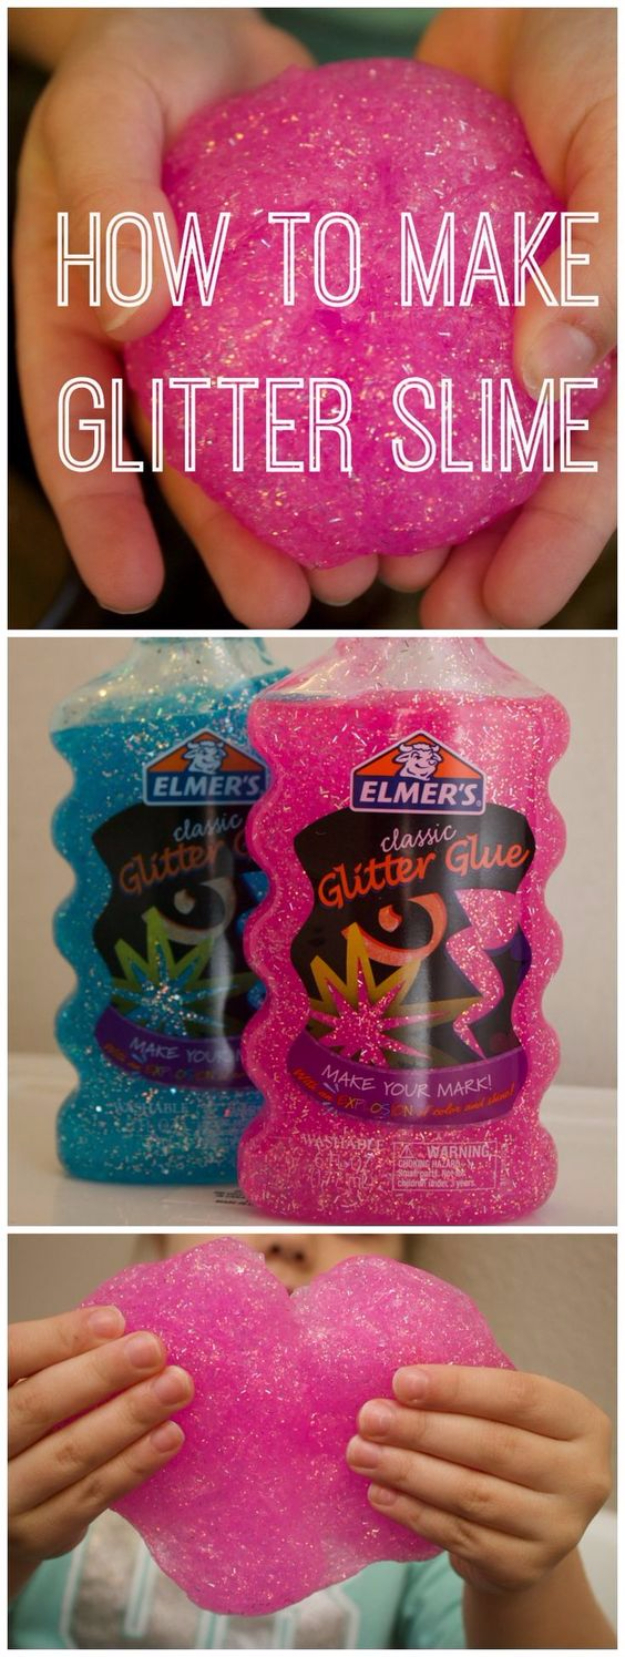 How To Make Glitter Slime Recipe - Stimulating Self-Made Ideas & Activities to Entertain the Youngsters